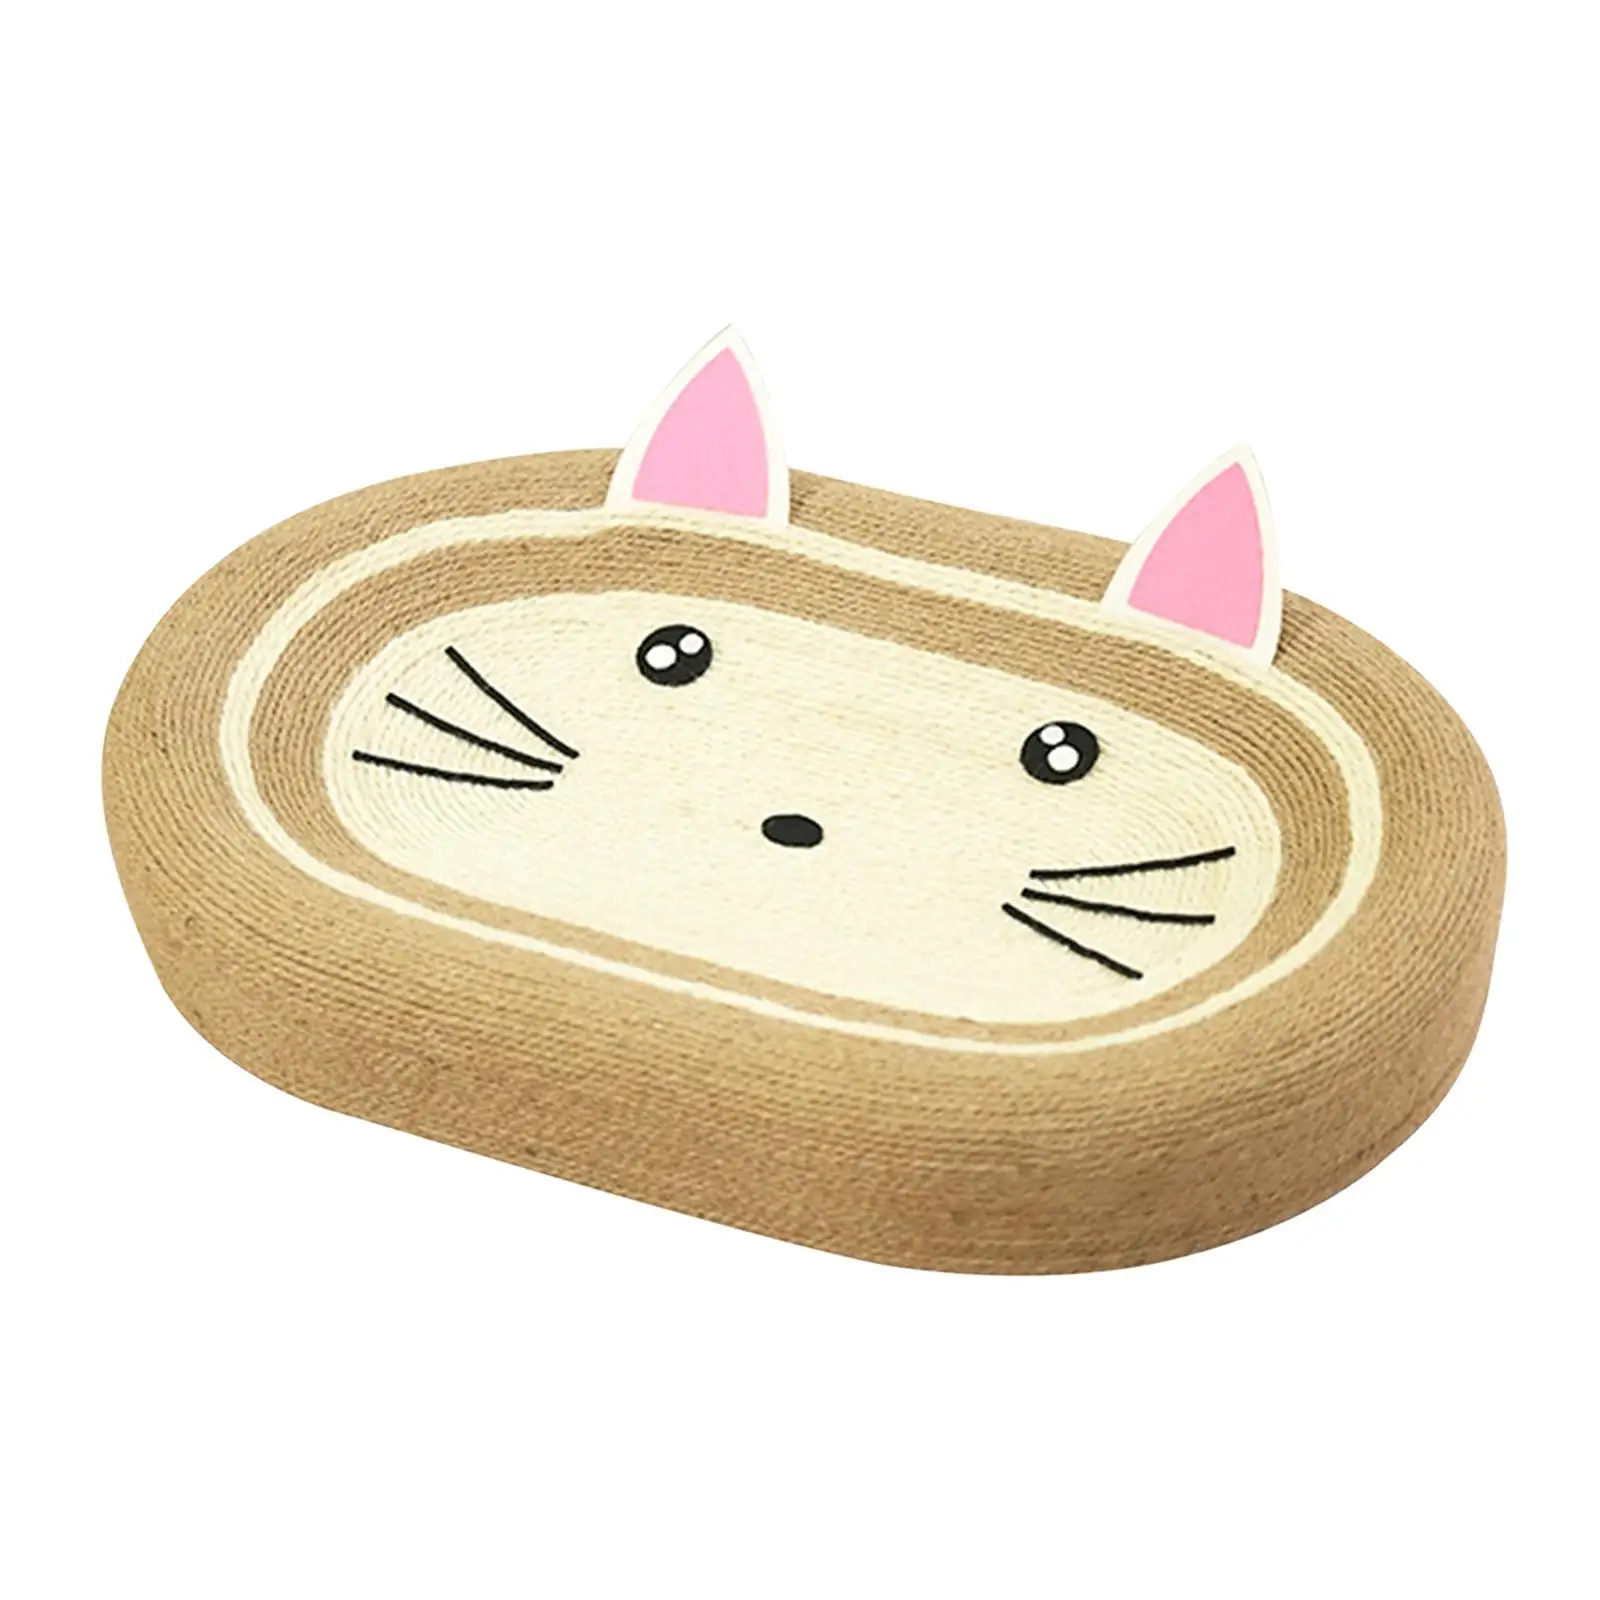 2 in 1 Cats Scratcher Toys for Indoor Cats Grinding Claw Cat Scratch Pad